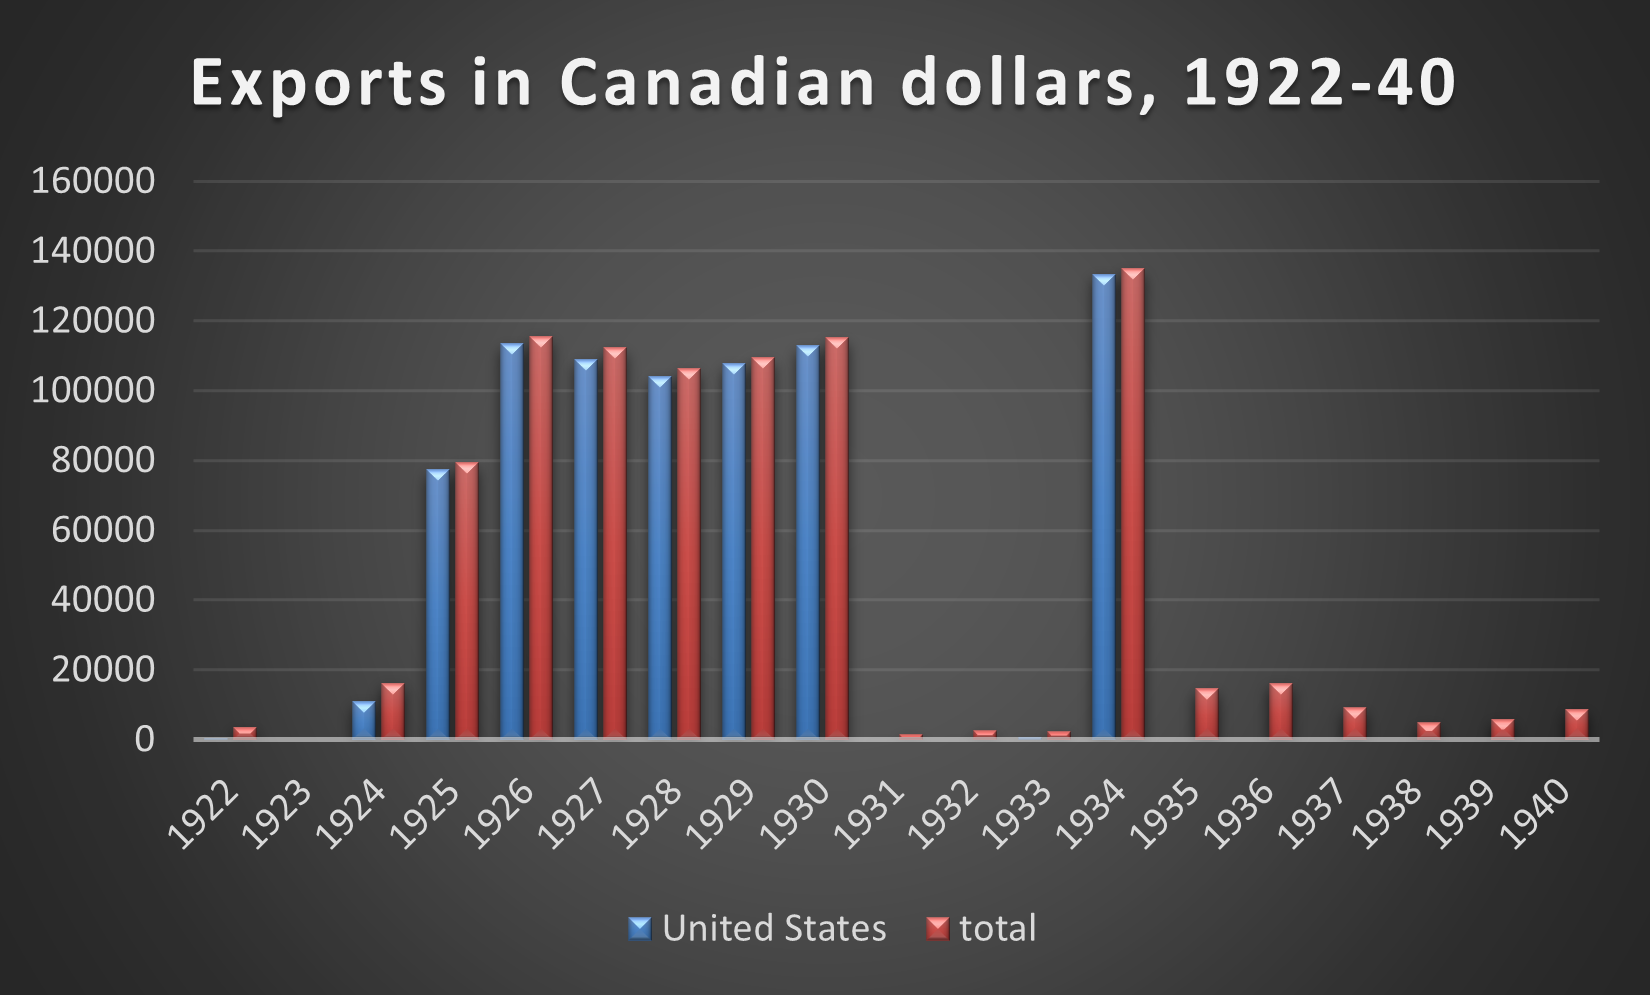 Graph showing Exports of Wine to the United Stated in Canadian Dollars 1922-1940